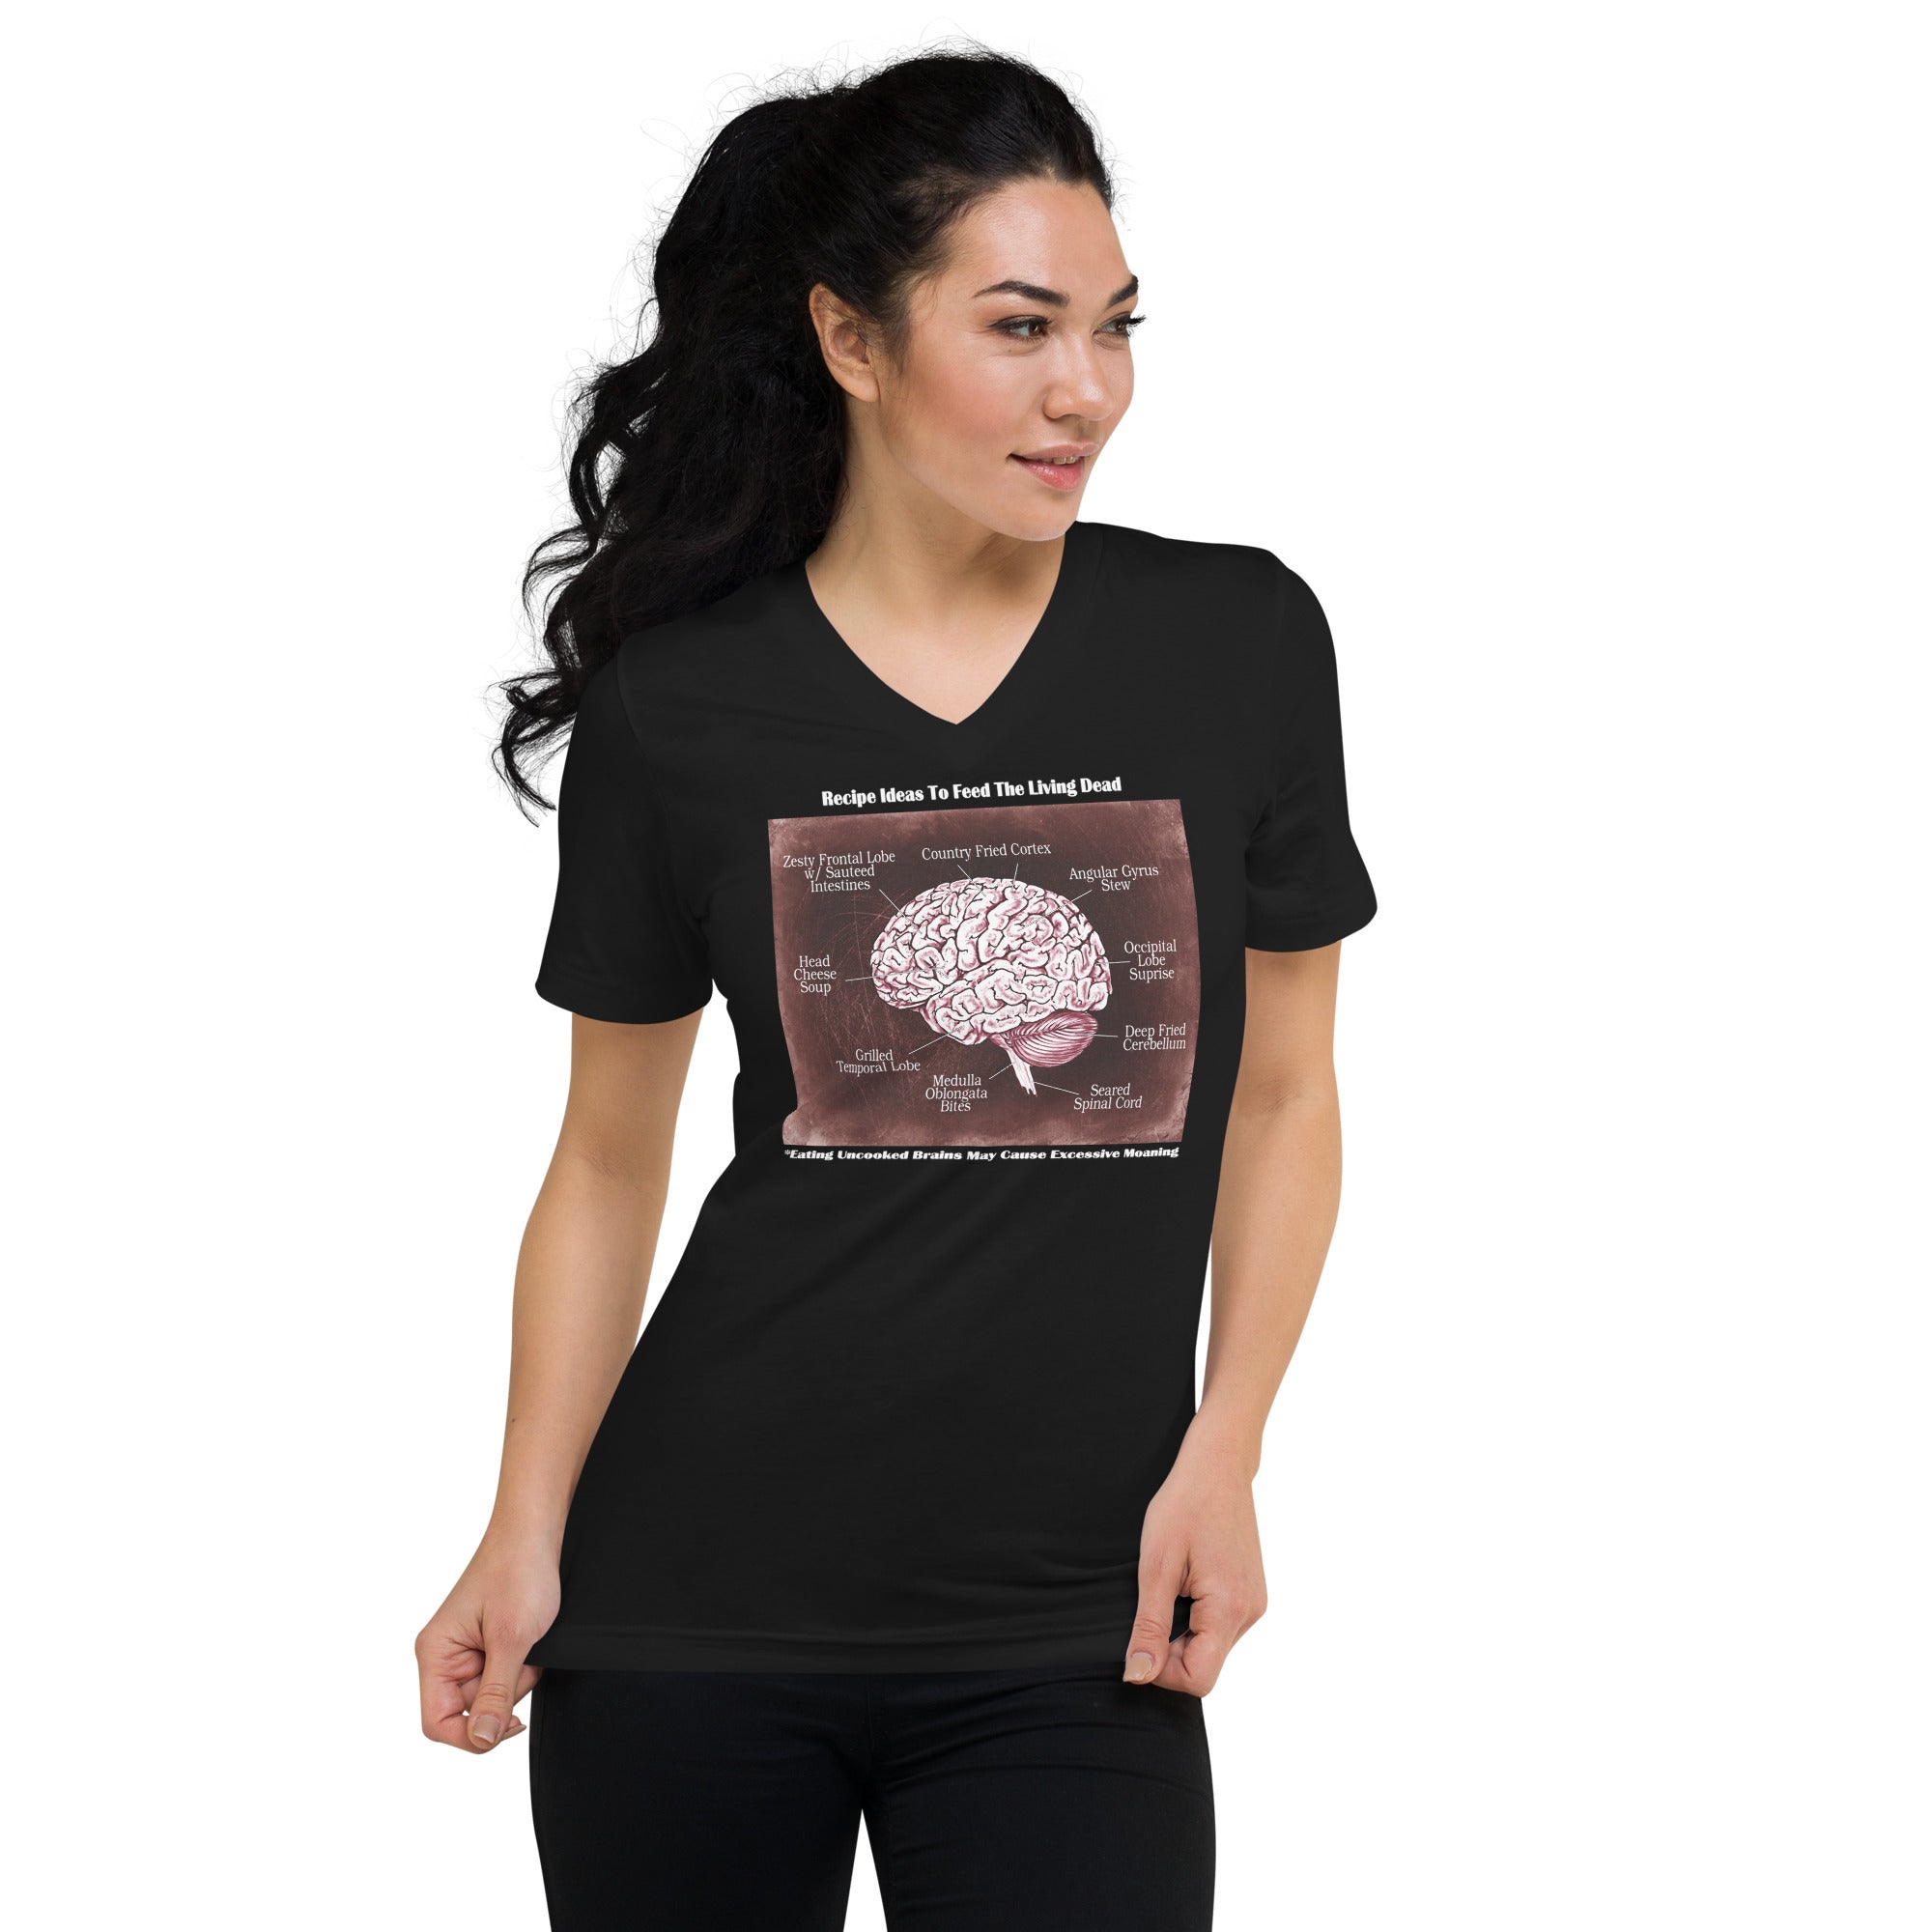 Recipe Ideas to Feed The Living Dead Zombie Women’s Short Sleeve V-Neck T-Shirt - Edge of Life Designs